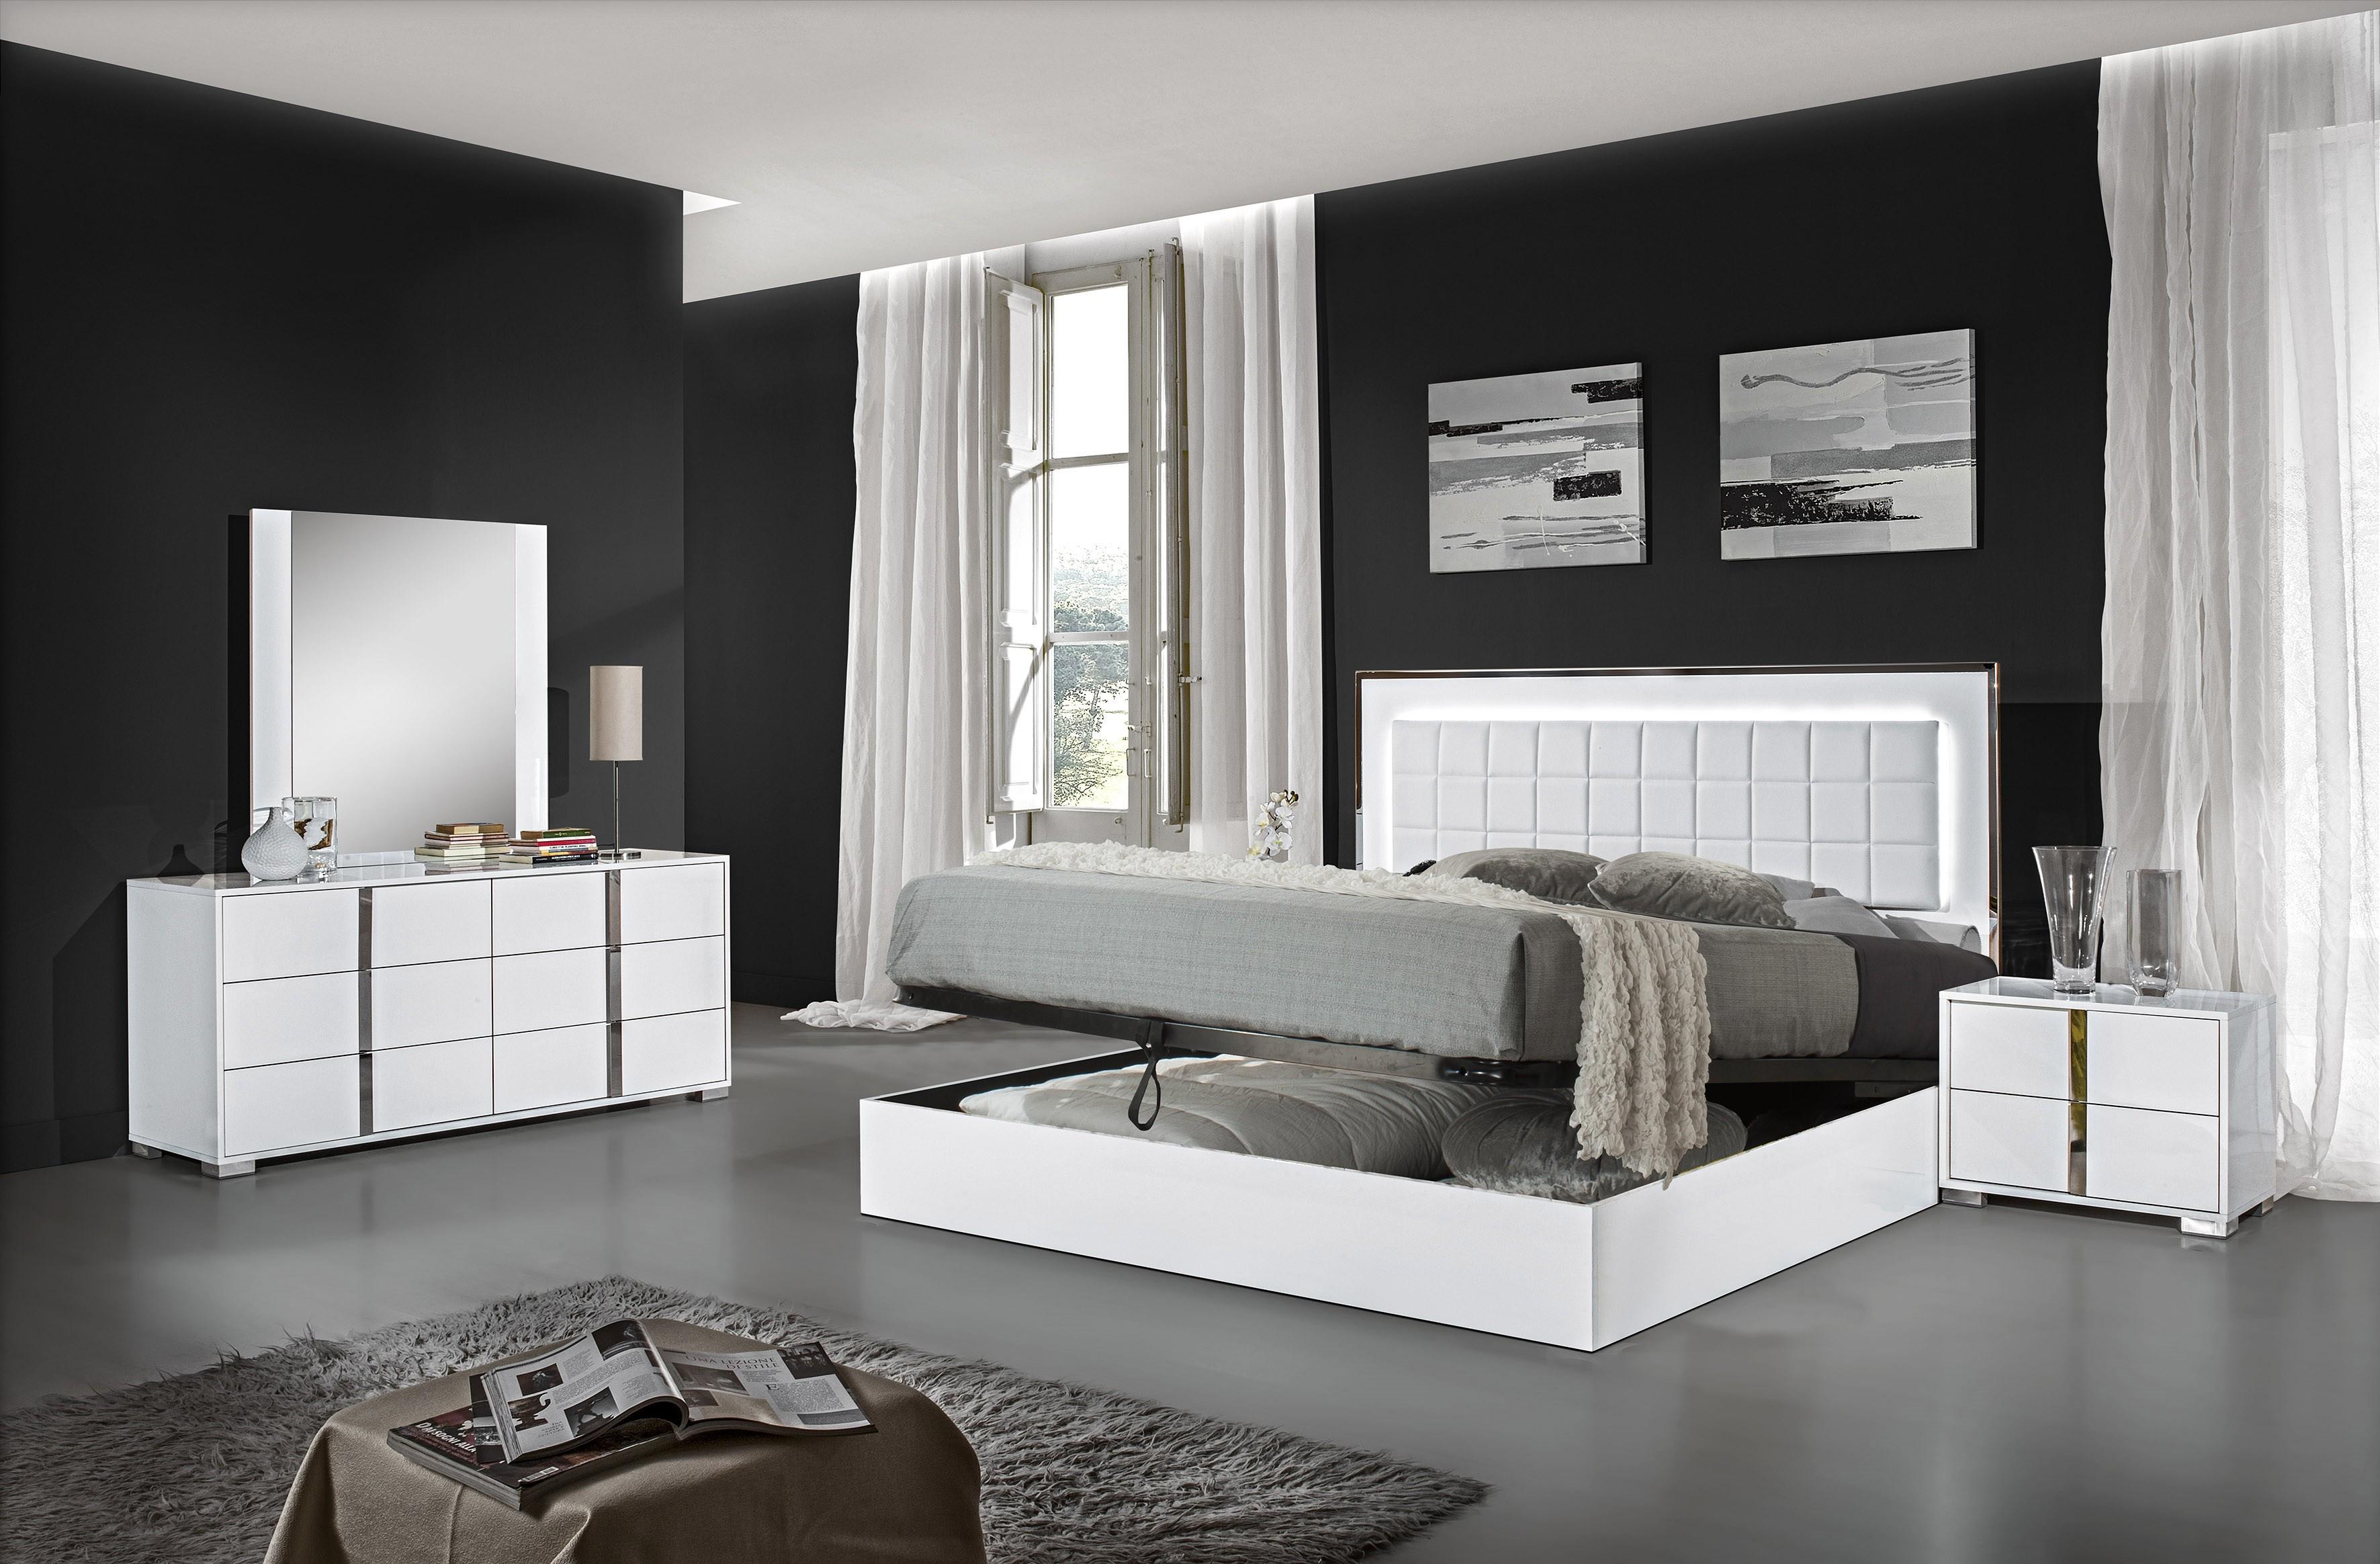 

    
Storage Queen Size Bedroom Set 6Pcs in White High Gloss MADE IN ITALY J&M Alice
